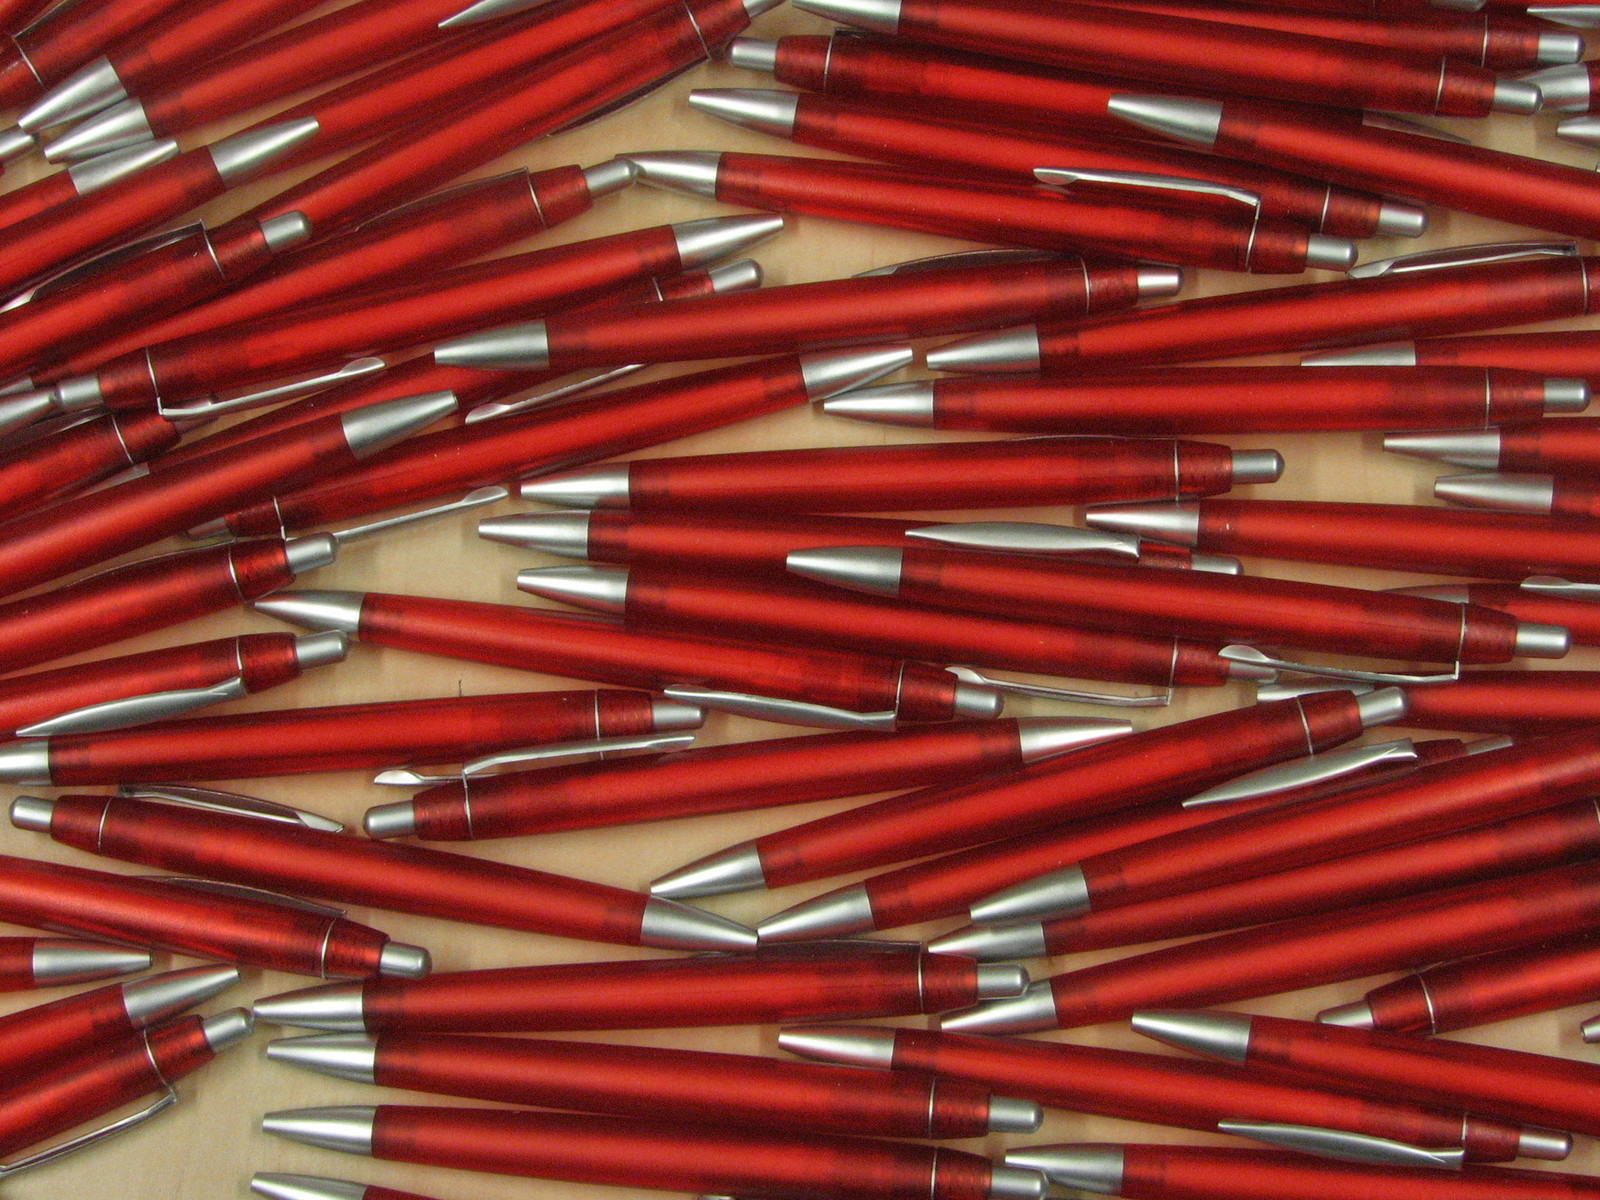 Am the pens red. Red Pen. Reed Pen.